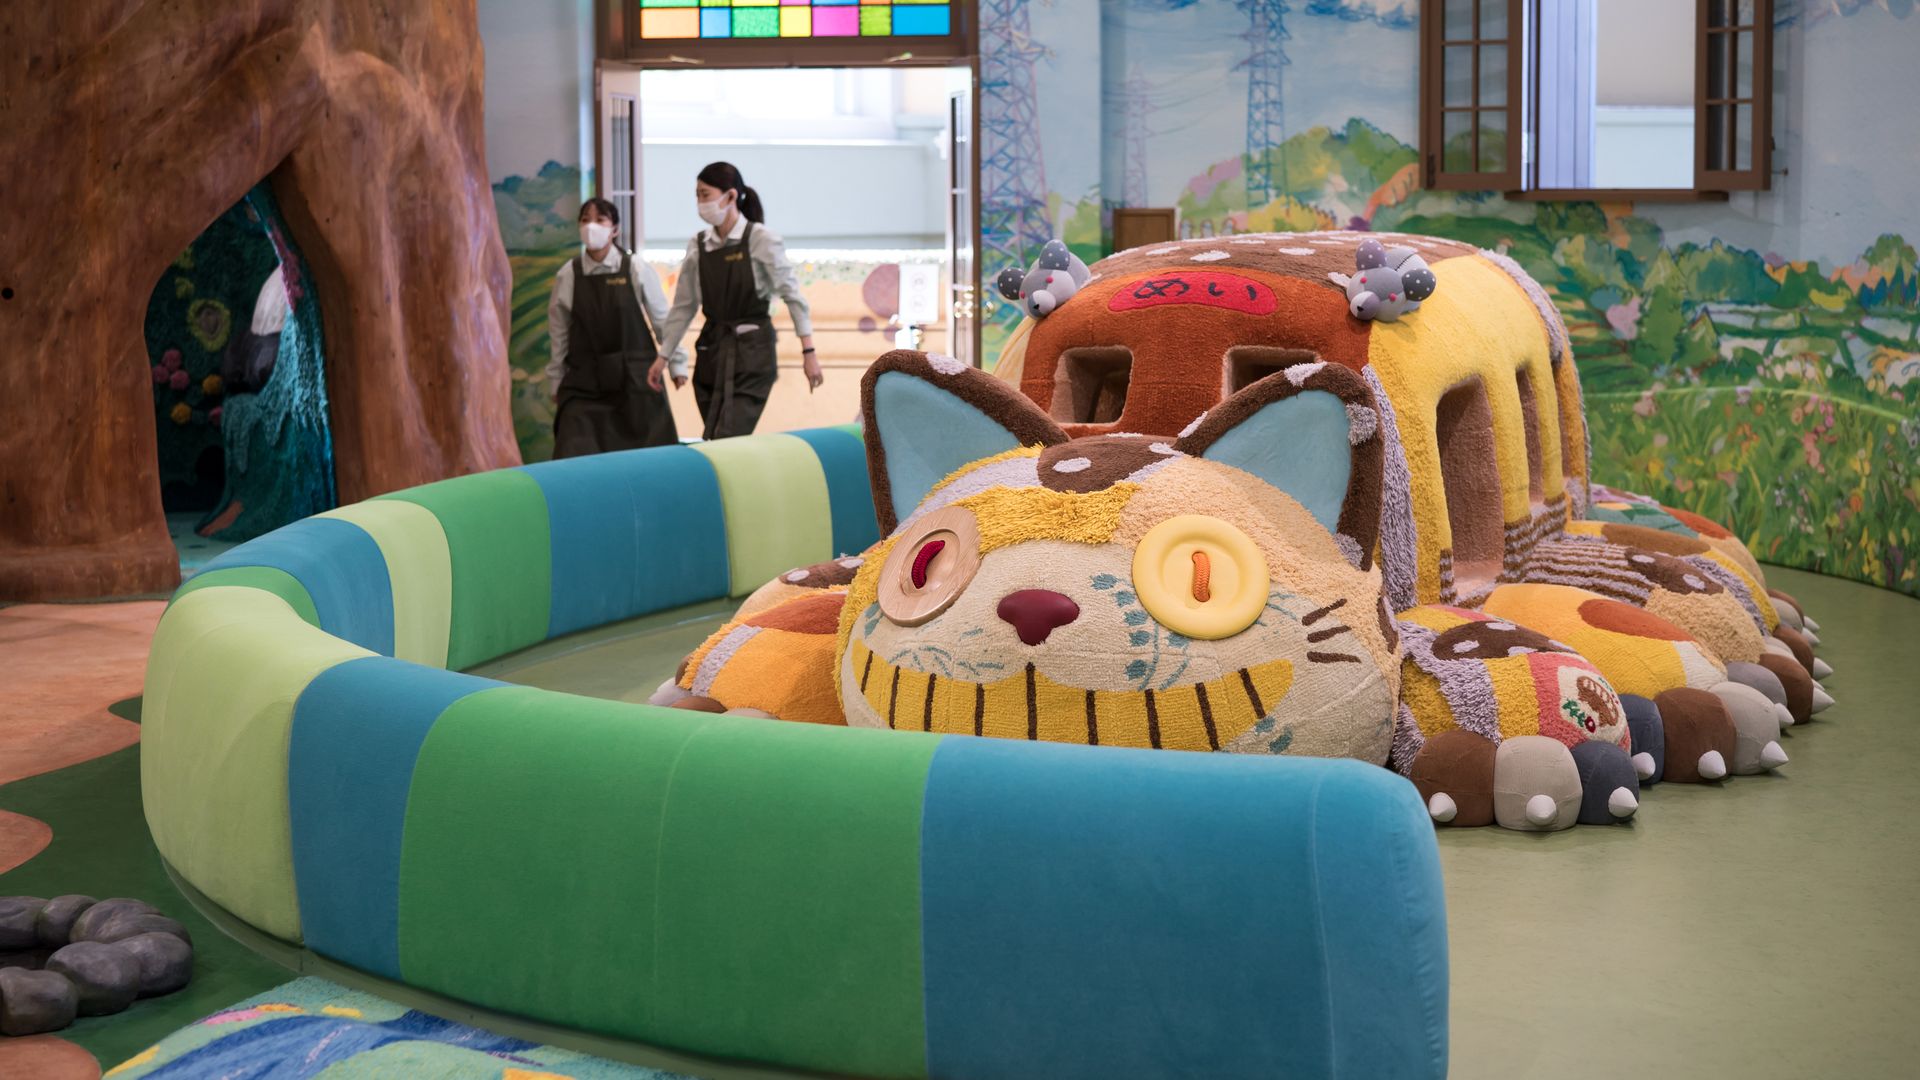 two women walk past a life-sized Cat Bus, from the film 'My Neighbor Totoro' in Japan